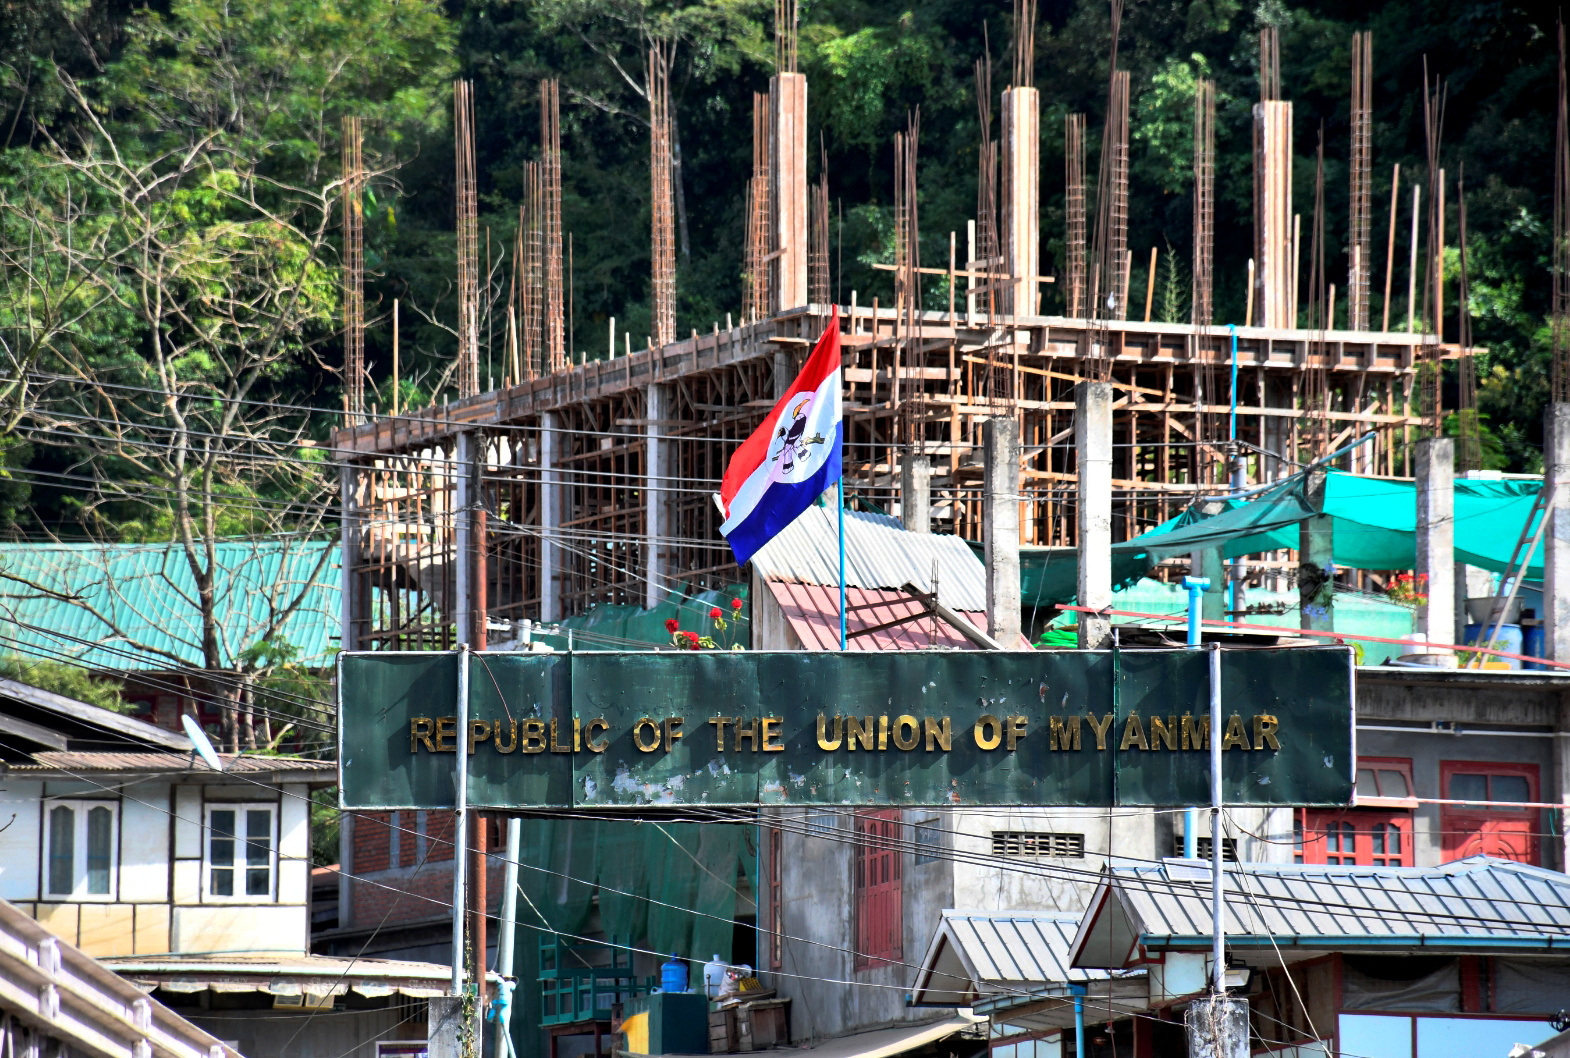 A flag of one of the Myanmar rebel forces is installed next to an under-construction structure in Myanmar’s Khawmawi village on the India-Myanmar border as seen from Zokhawthar village in Champhai district of India’s northeastern state of Mizoram, India, on Tuesday. Photo: Reuters